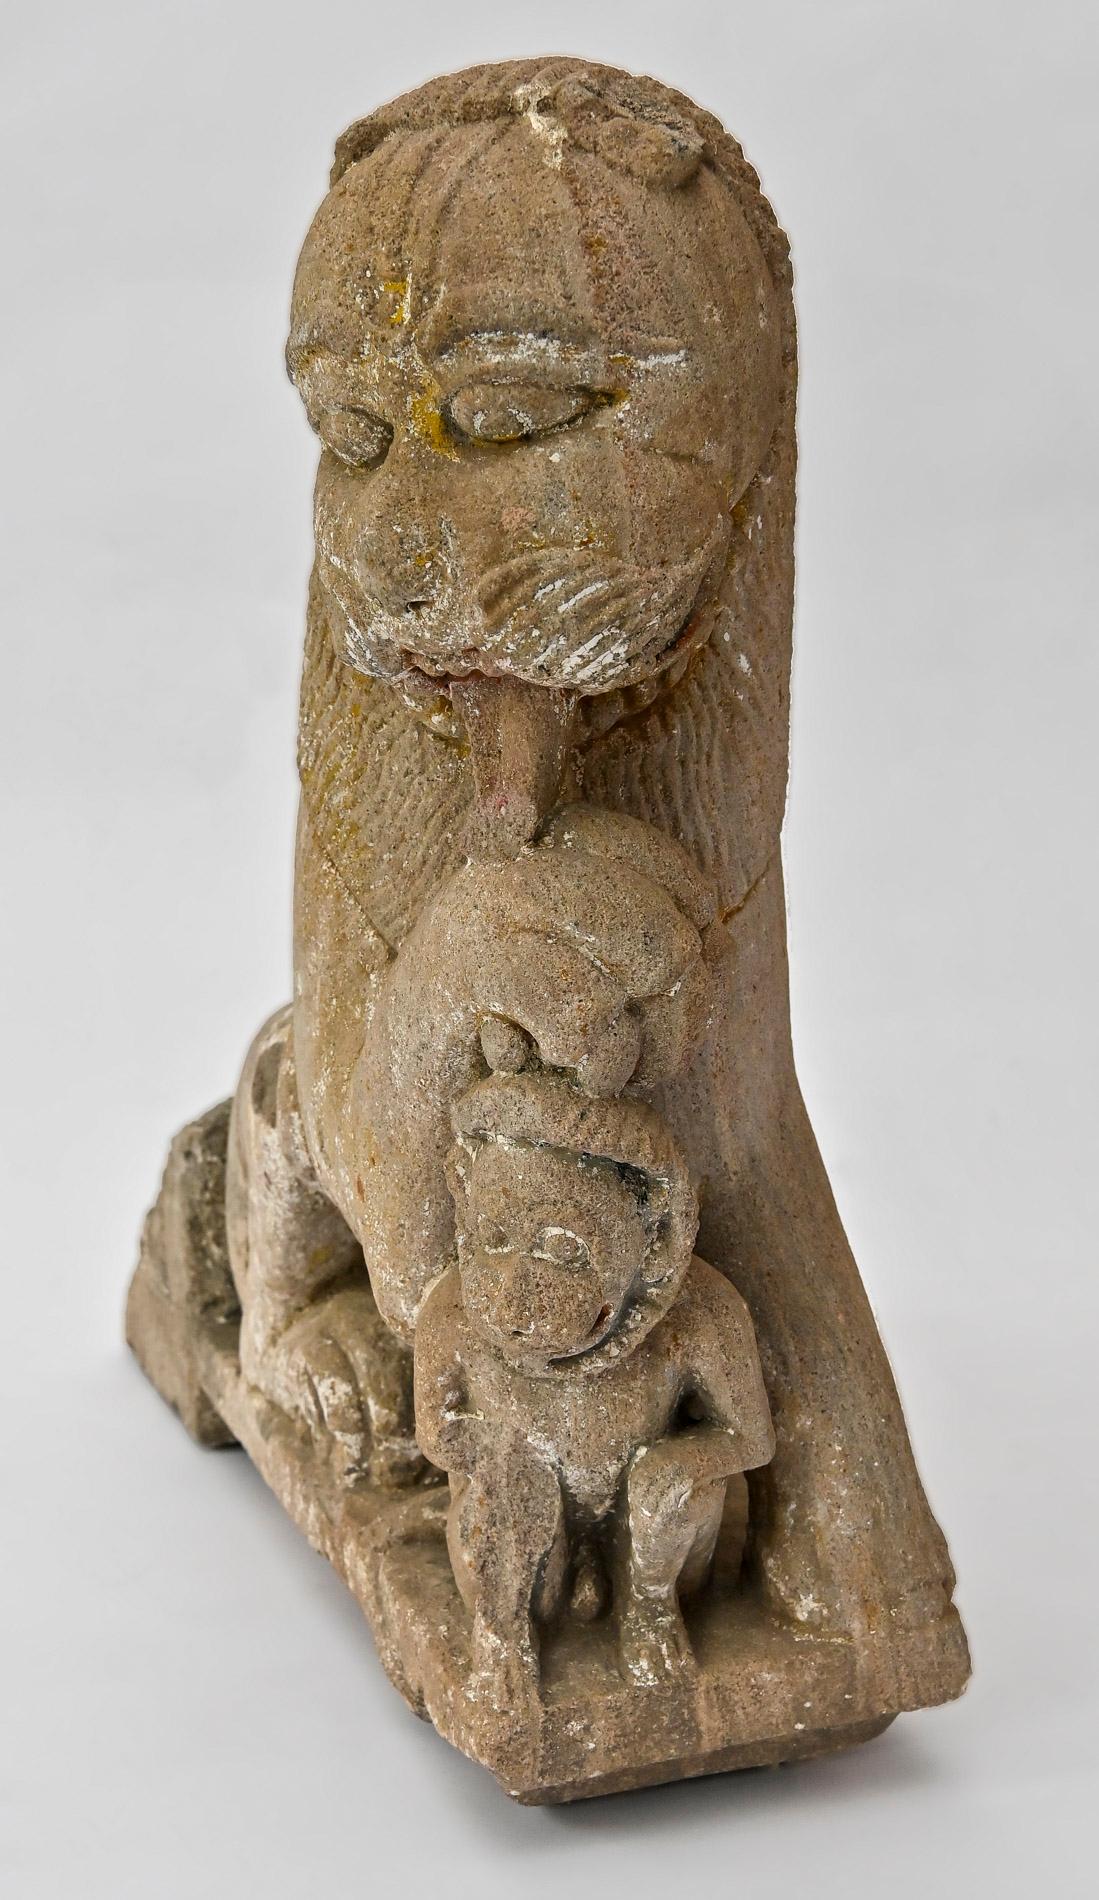 17th Century sculpture stone lion holding a monkey.
This very decorative Piece was once built into a building as a striking focal point. The depiction of a lion and a monkey interacting together is rather rare, which is why this item so special. It